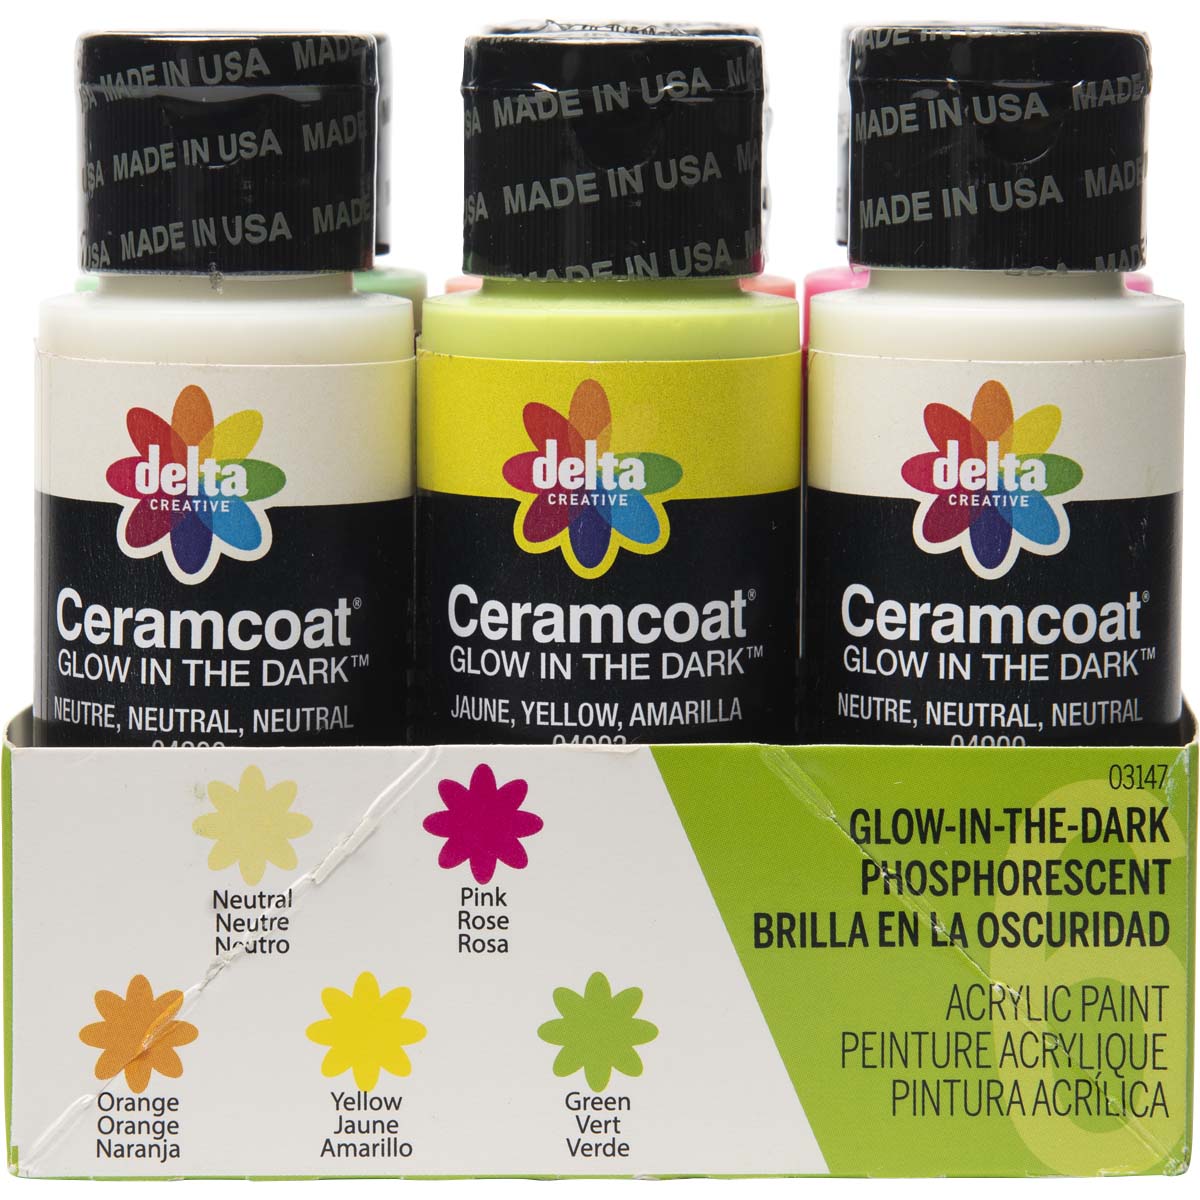 Delta Ceramcoat ® Paint Sets - Glow-in-the-Dark™, 6 Colors - 03147